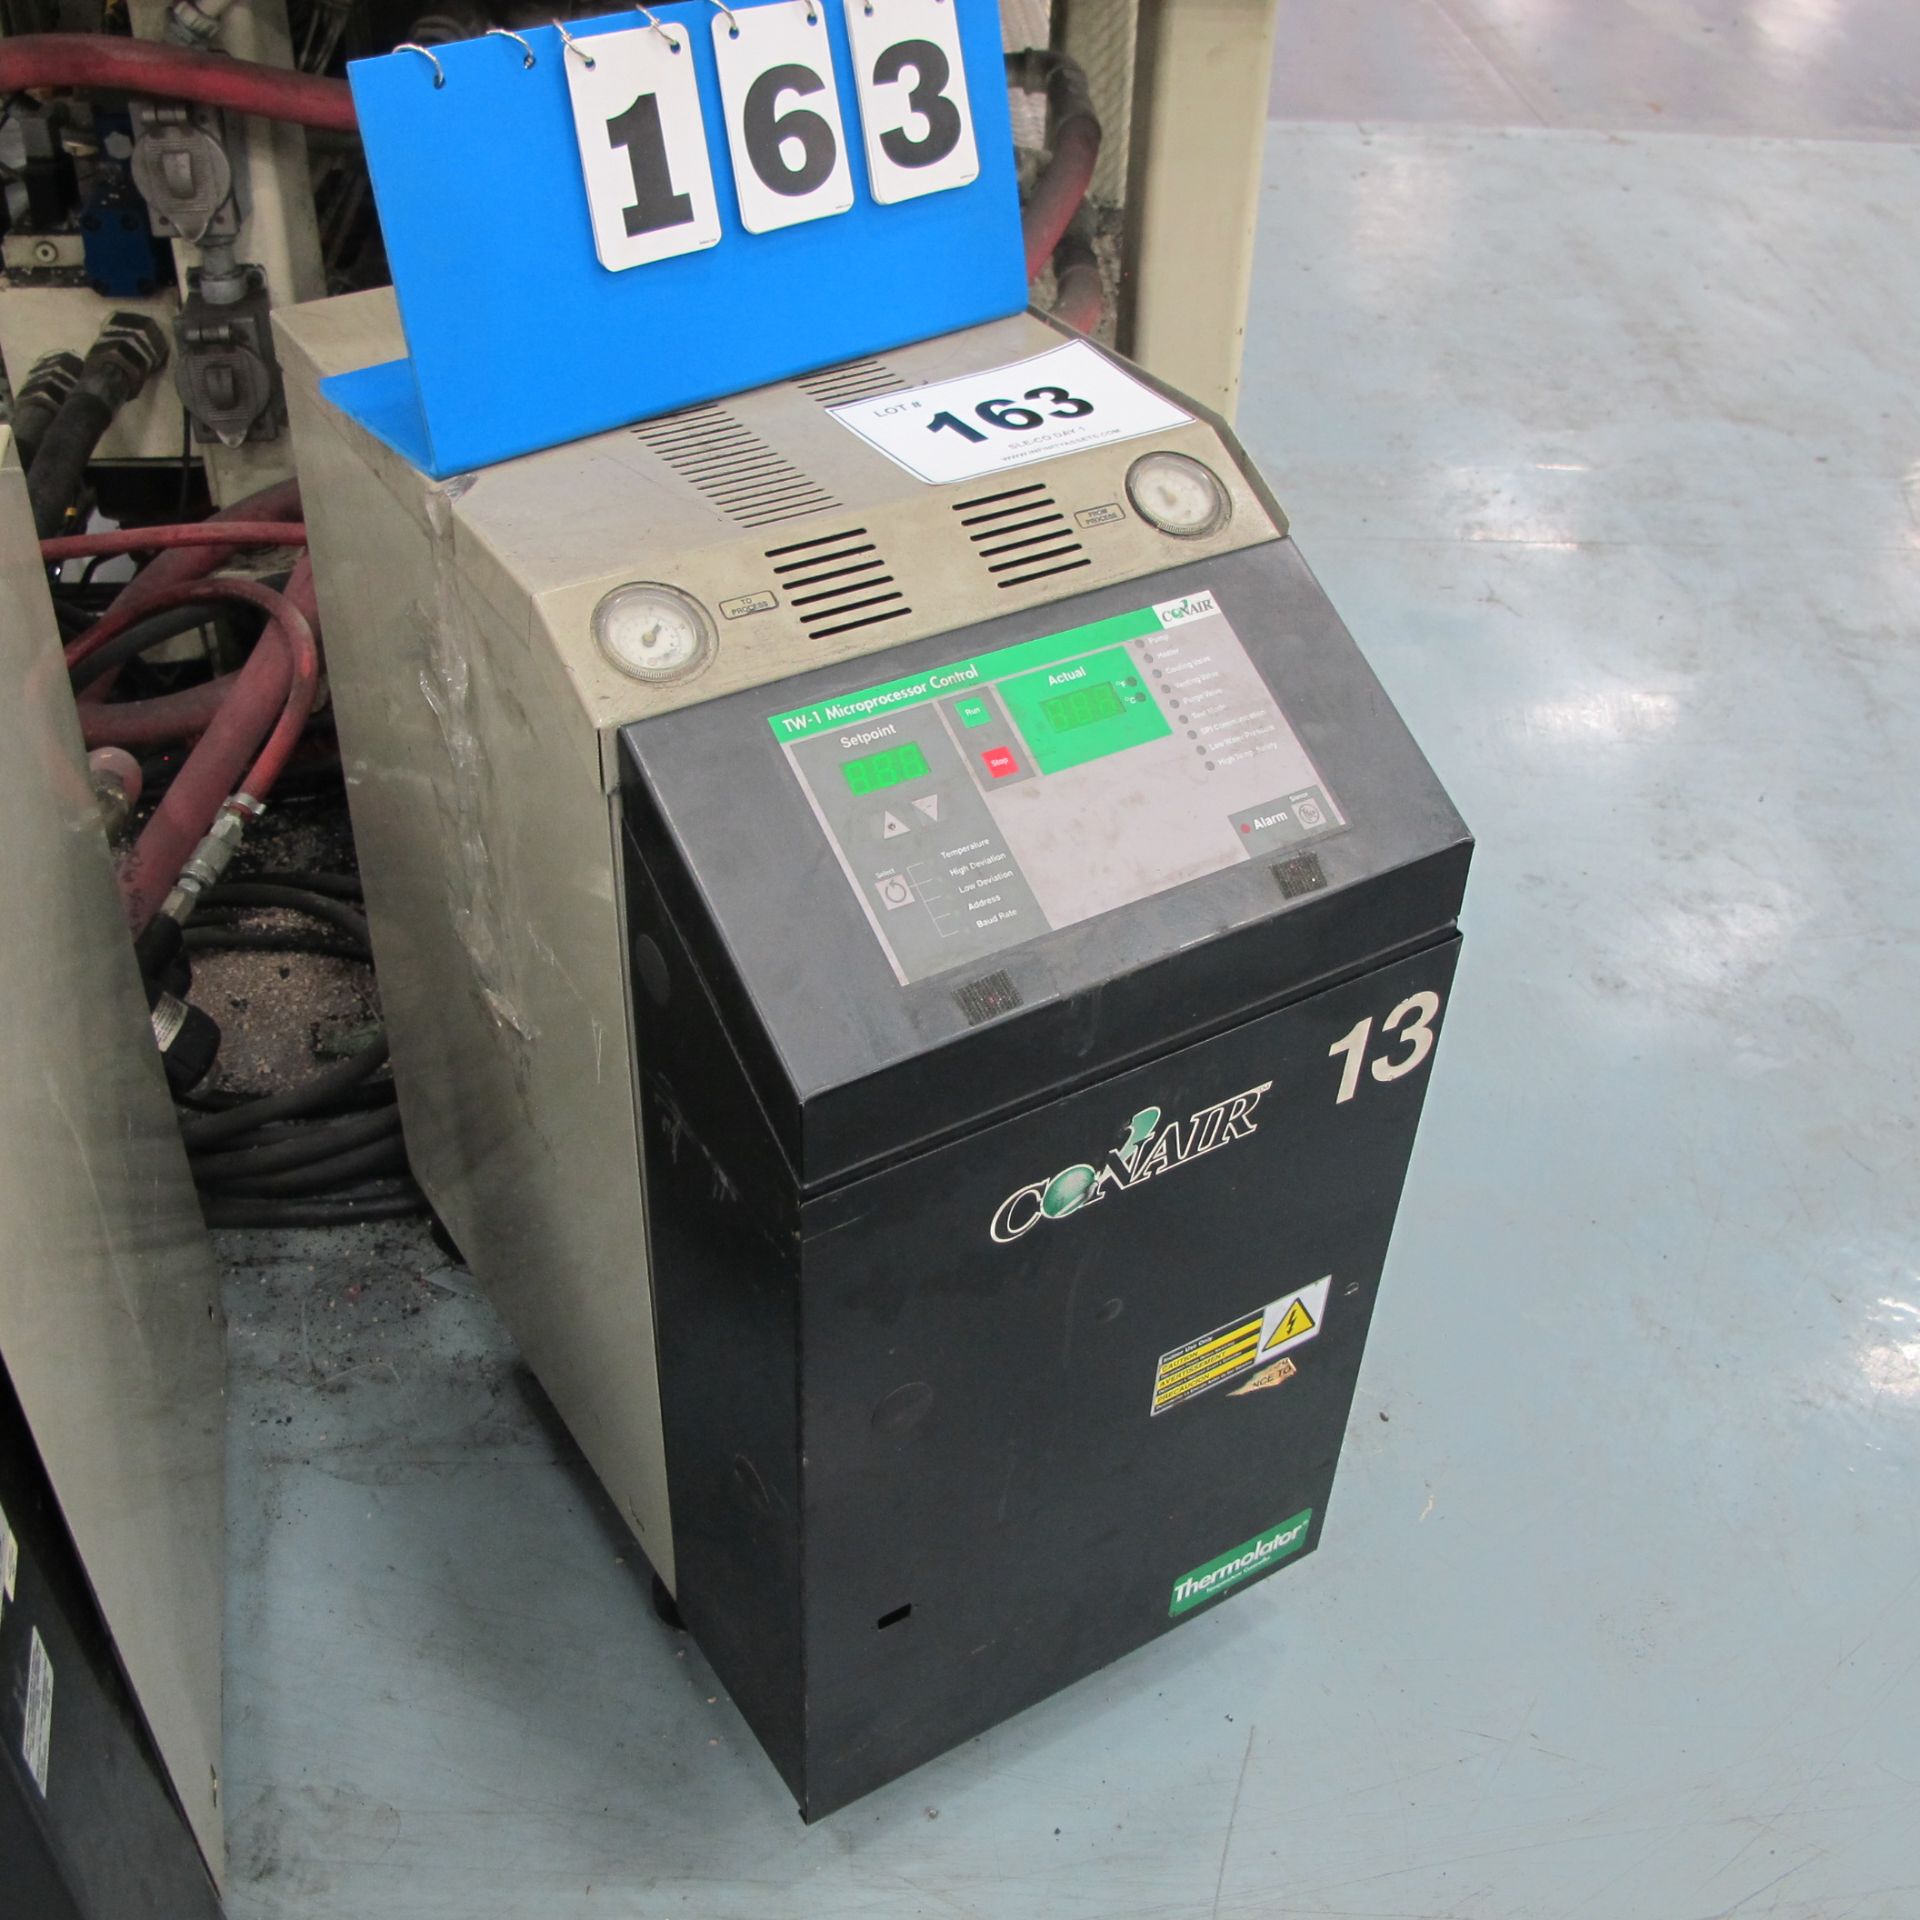 CONAIR TW1 CONTROLLED THERMOLATOR MX1-DI (LOCATED AT LOT 55)